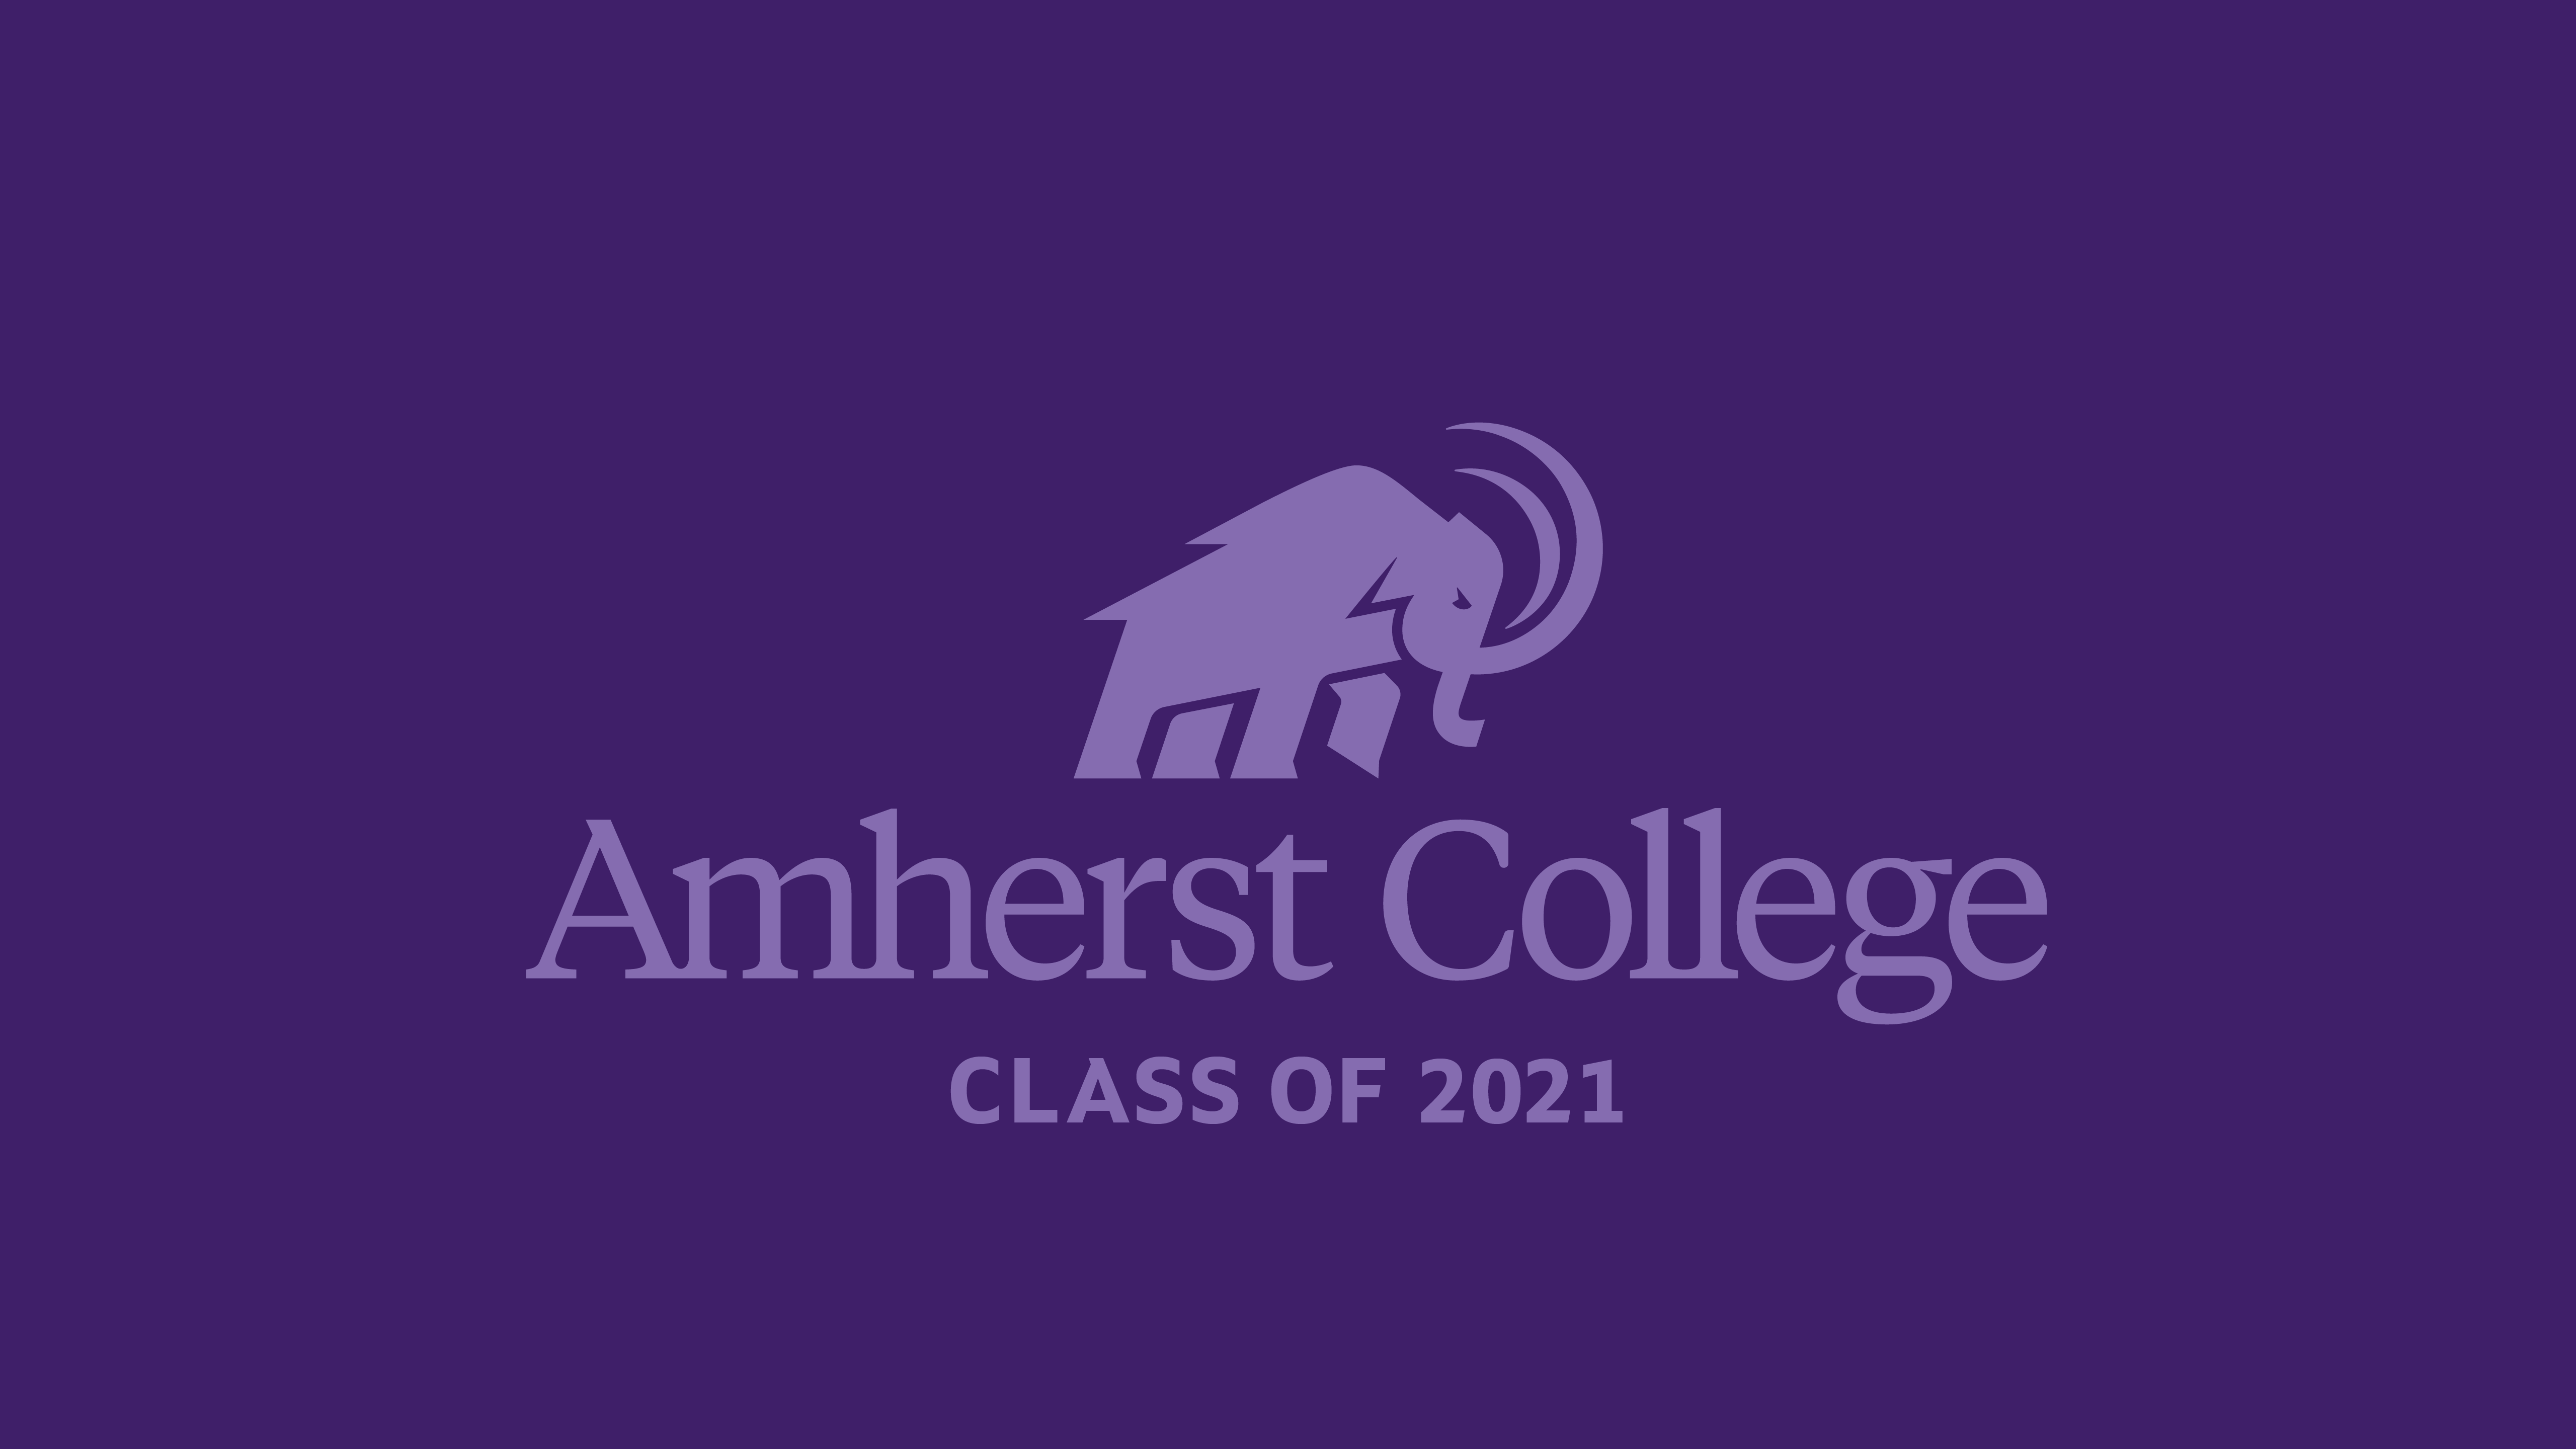 Amherst College Class of 2021